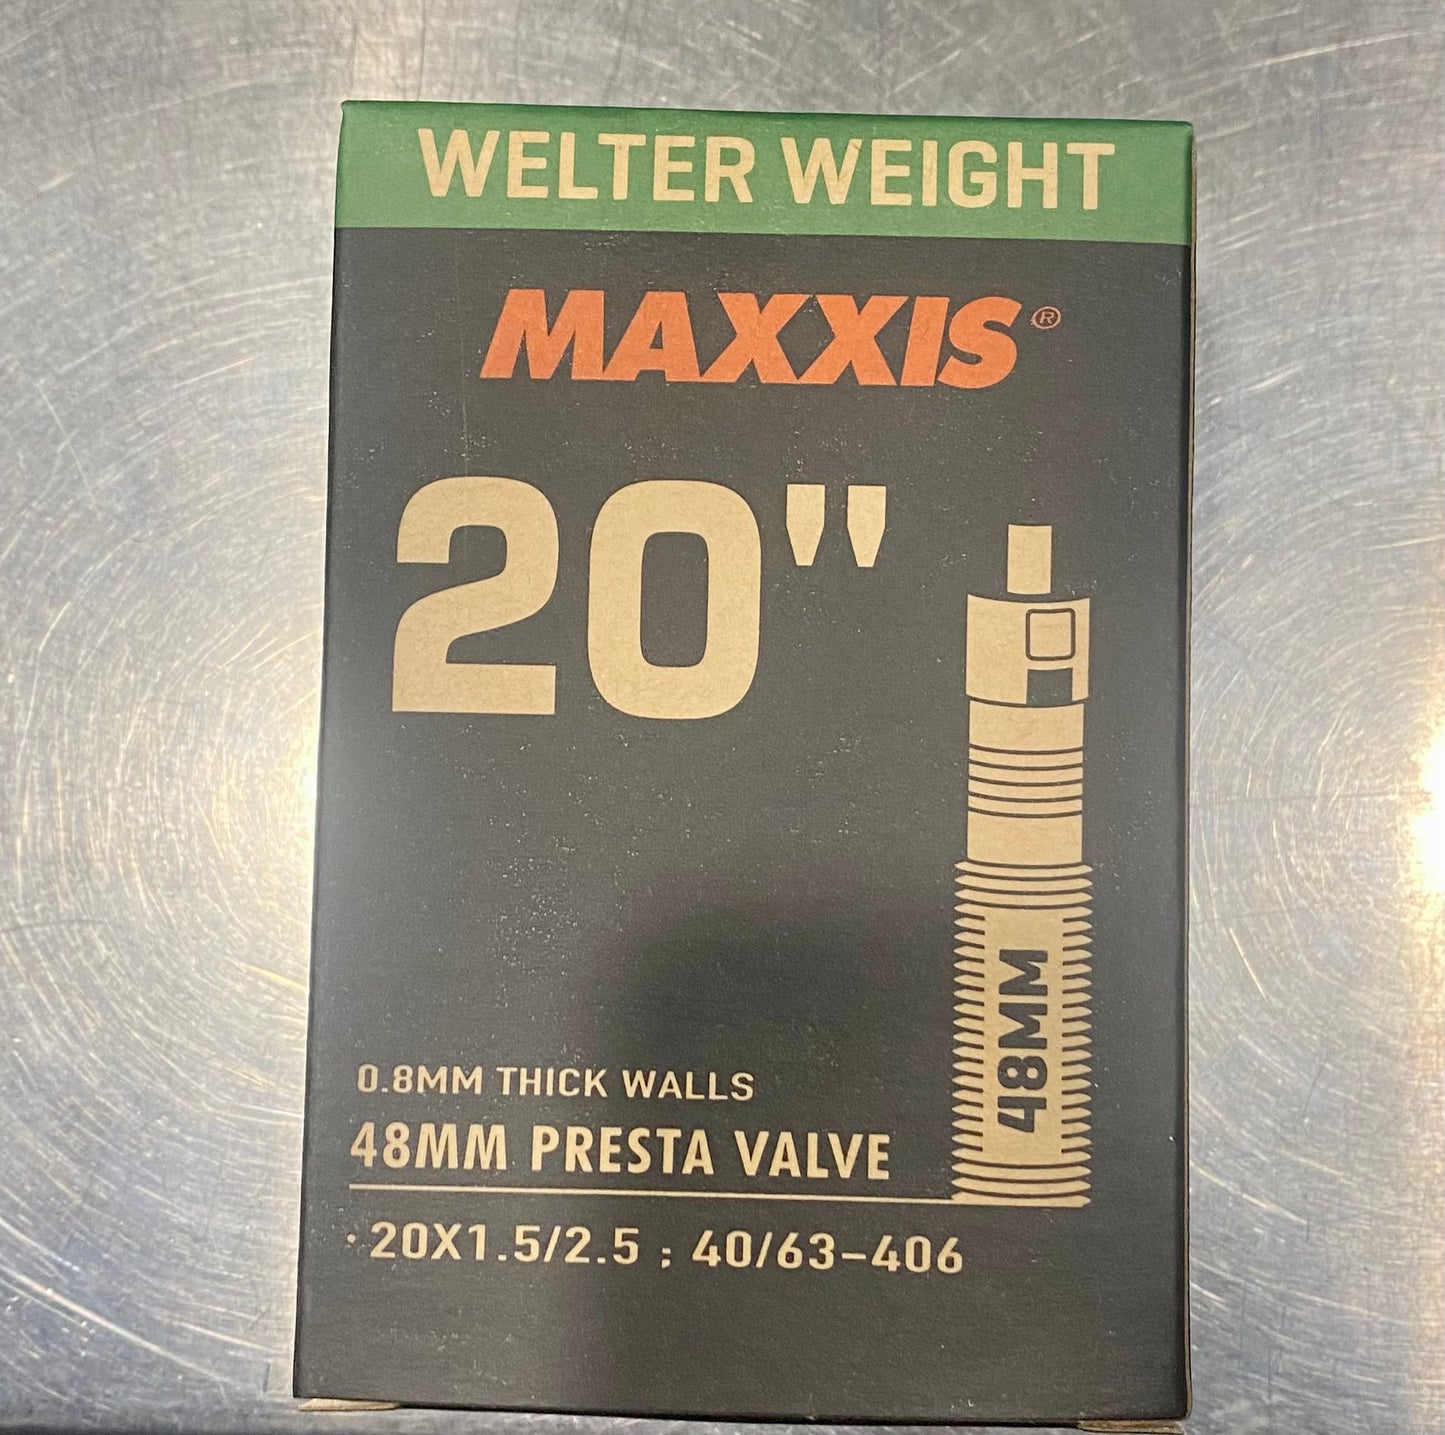 MAXXIS Welter Weight Tubes